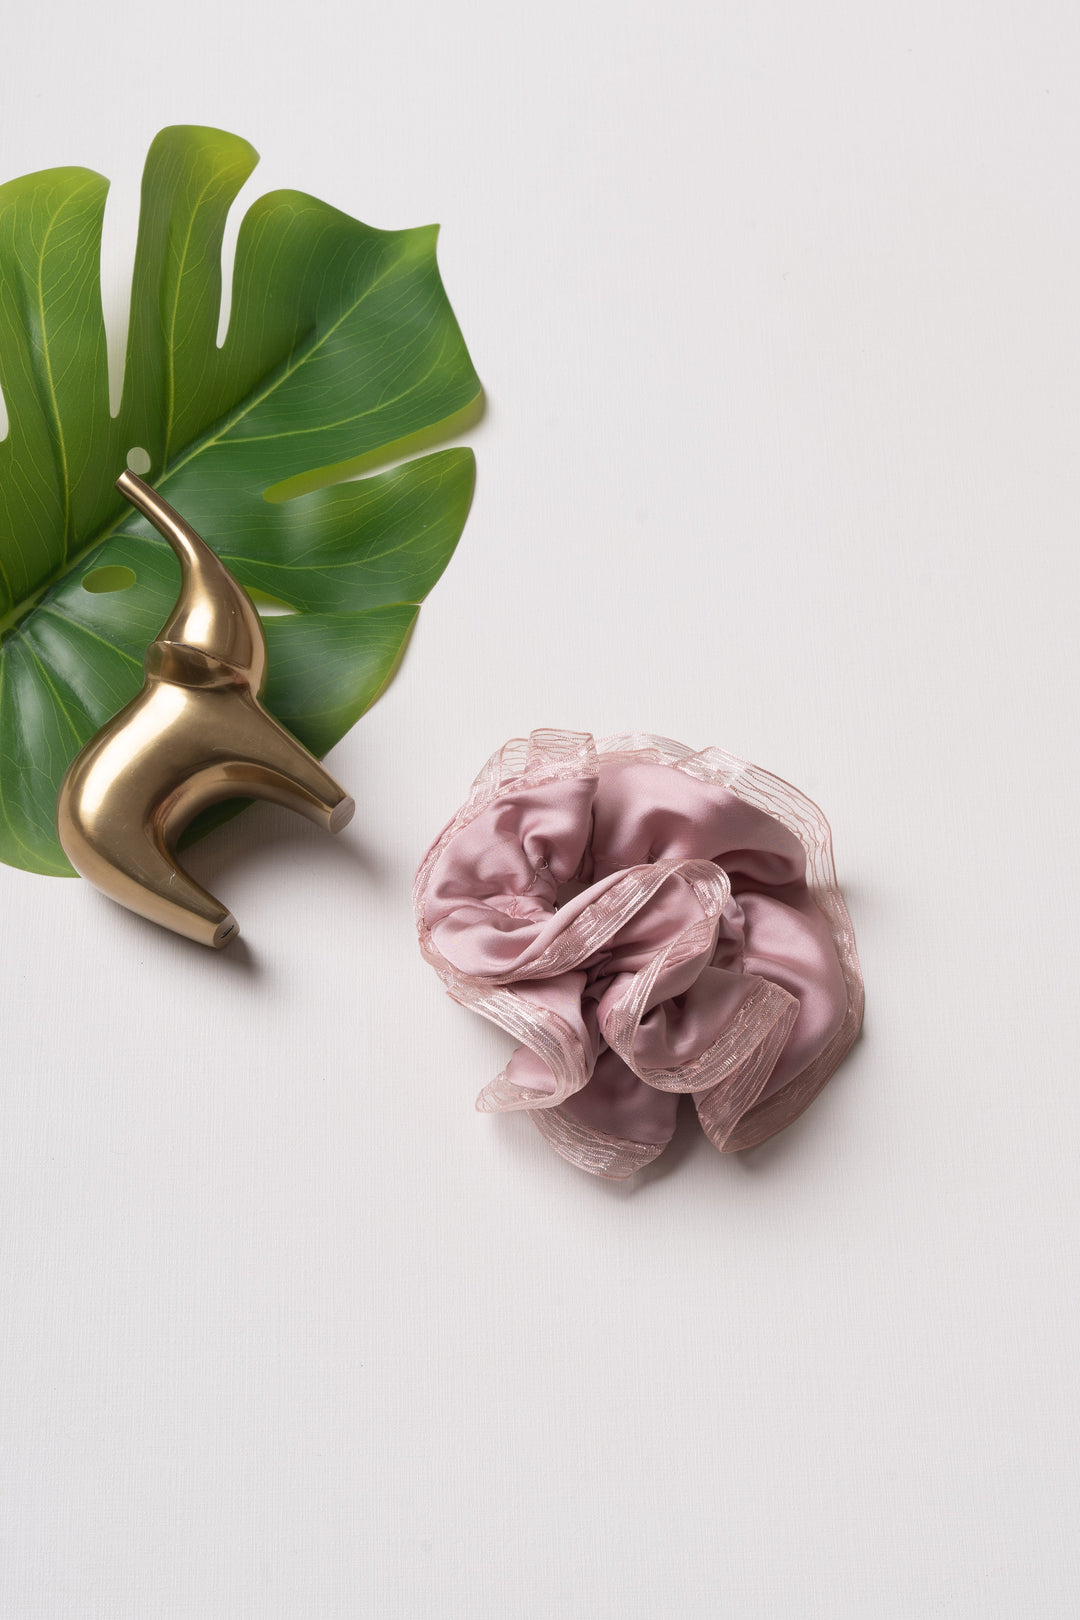 The Nesavu Scrunchies / Rubber Band Blush Tulle Elegance Scrunchie - Subtle Pink Hair Accessory Nesavu Pink JHS17F Subtle Pink Tulle Scrunchie | Chic Blush Hairband for Delicate Styling | The Nesavu